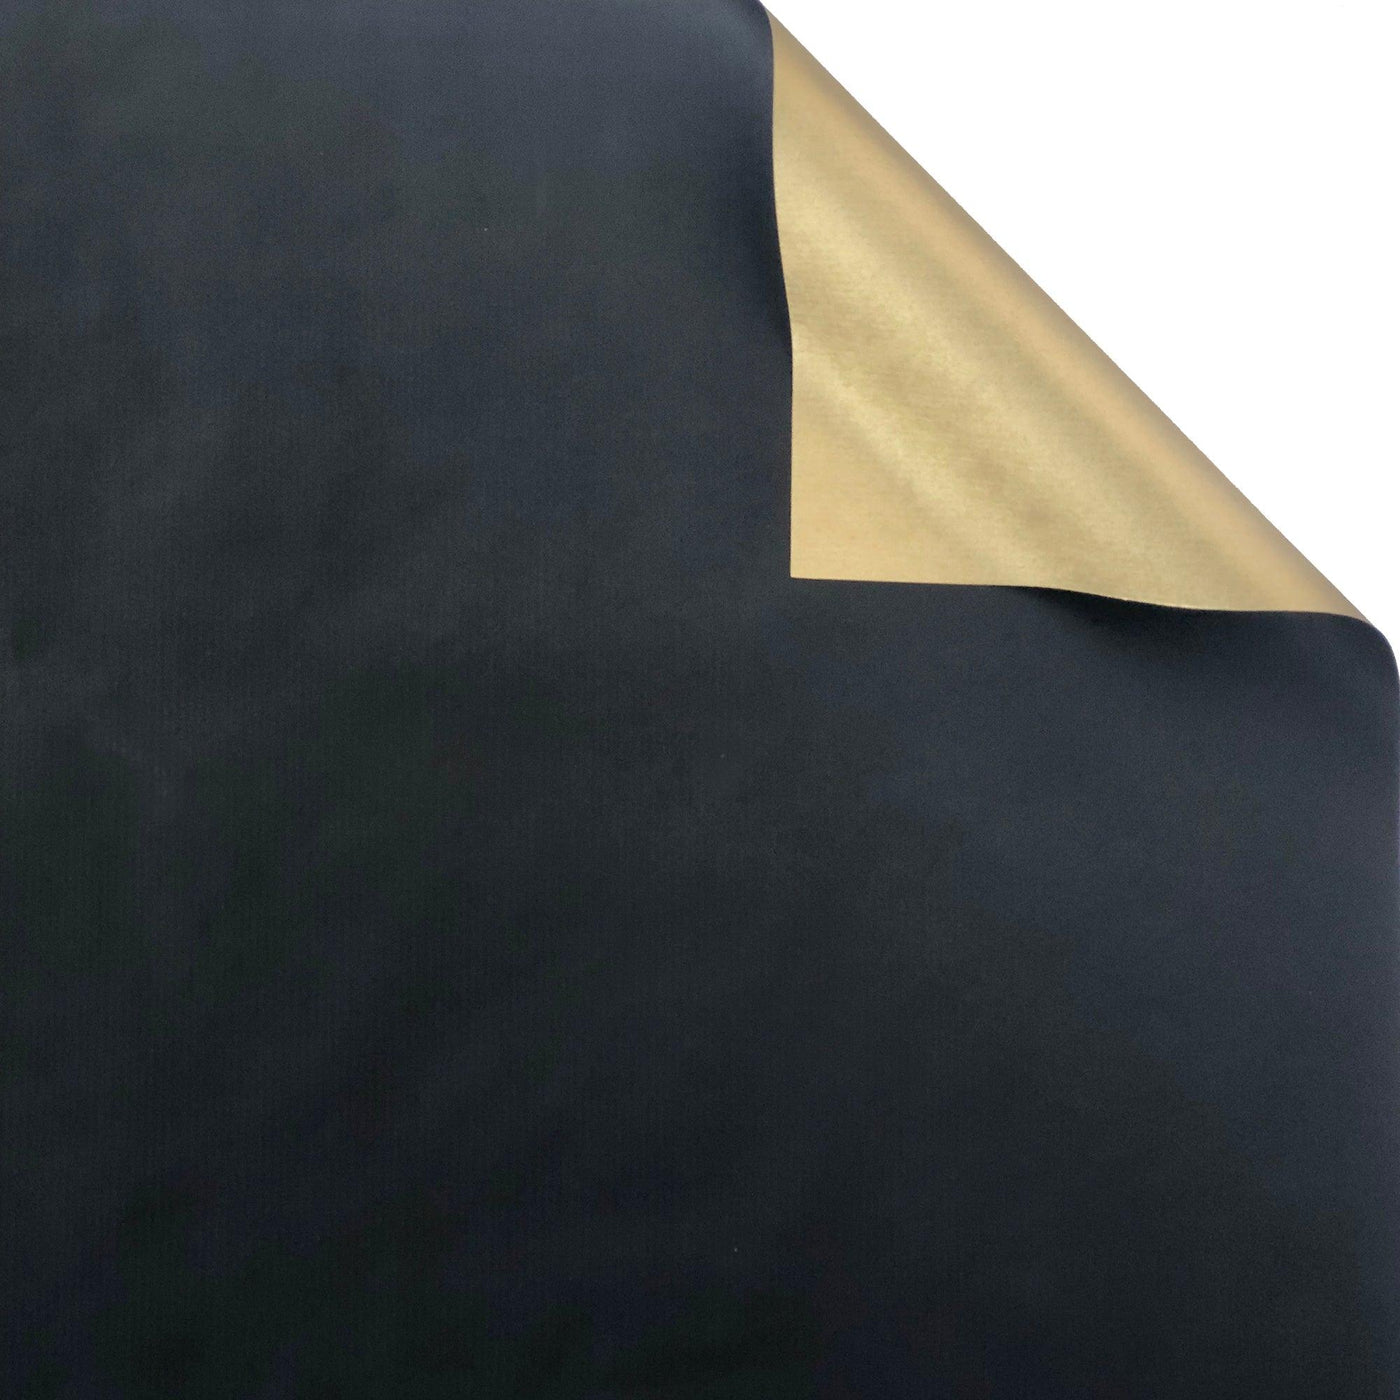 Two-Sided Black Gold Kraft Gift Wrap by Present Paper - Vysn